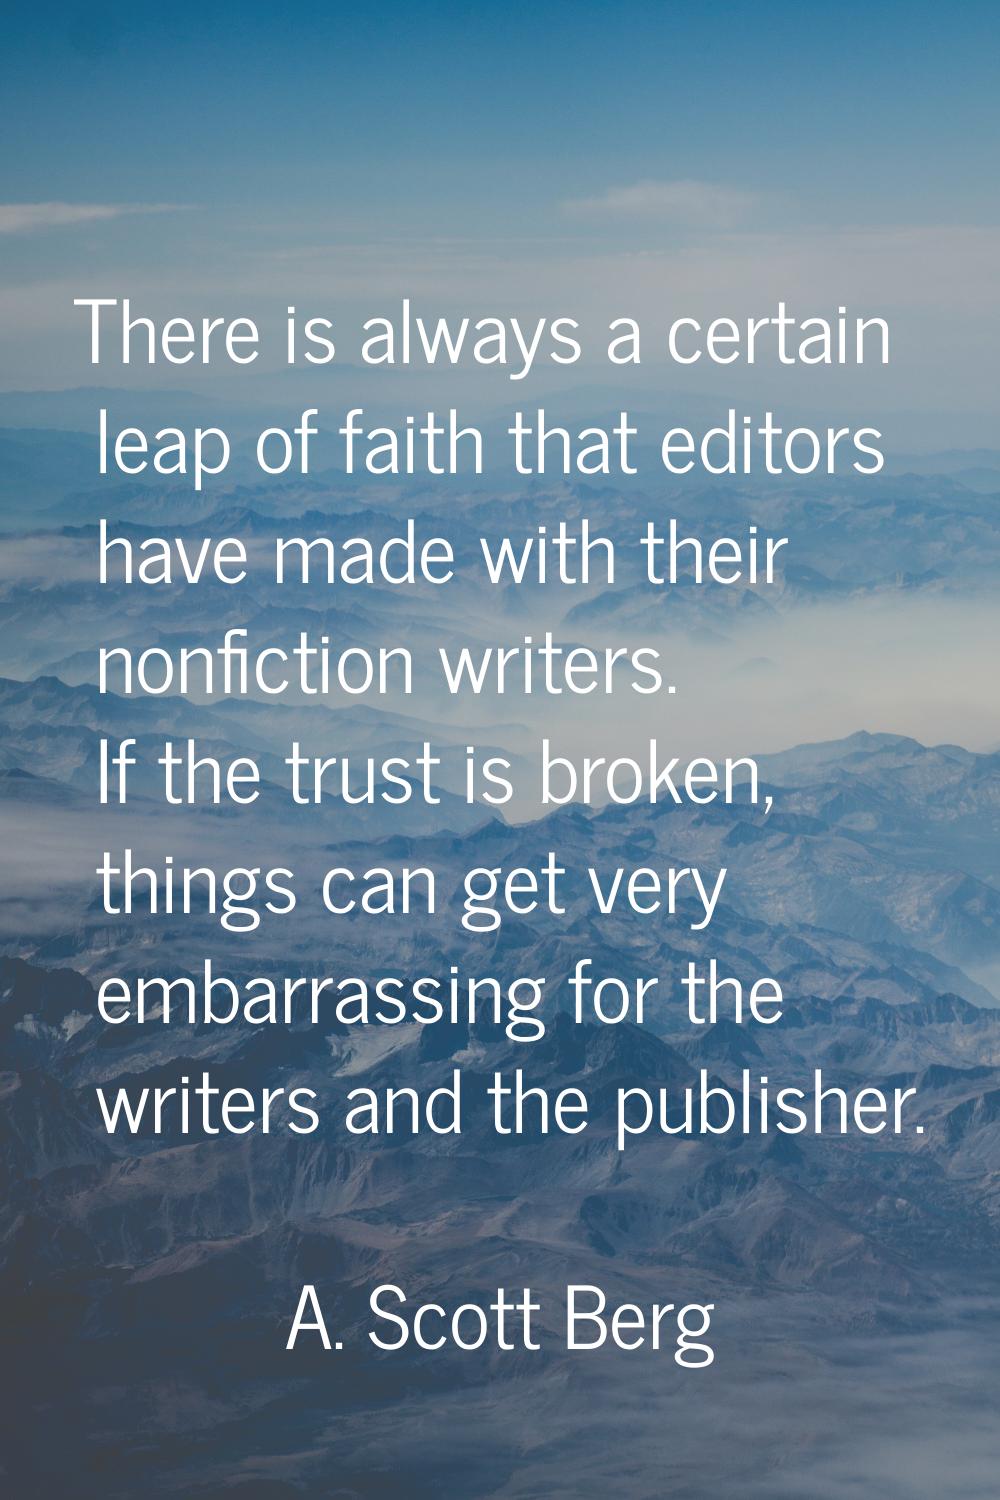 There is always a certain leap of faith that editors have made with their nonfiction writers. If th